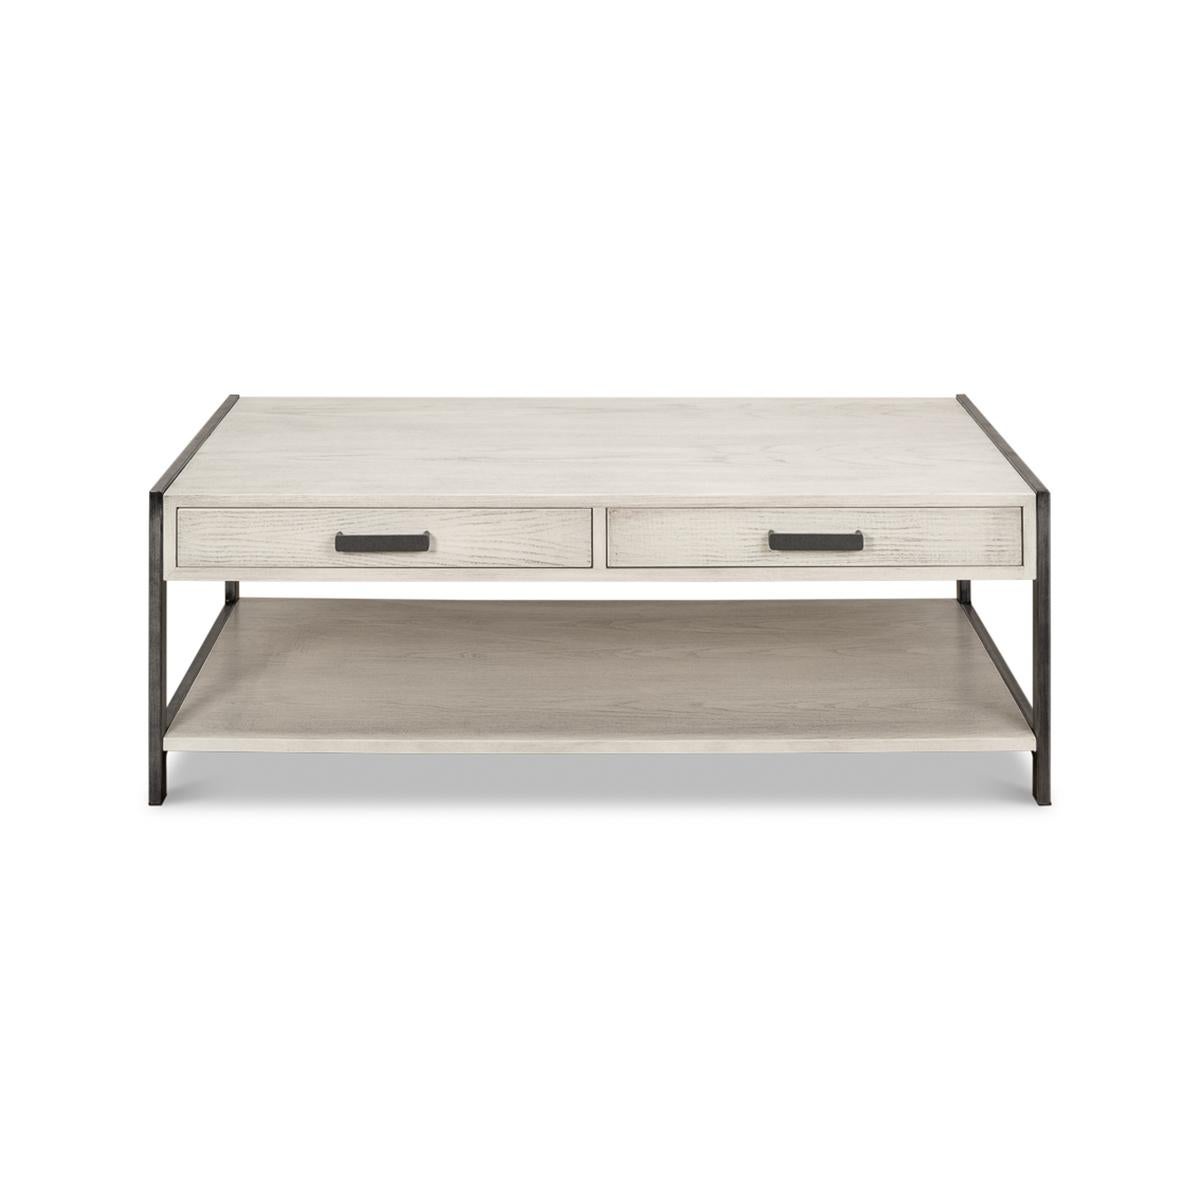 Industrial Coffee Table, birch and ash in an ivory finish with two drawers and a lower tier shelf.

Dimensions: 52